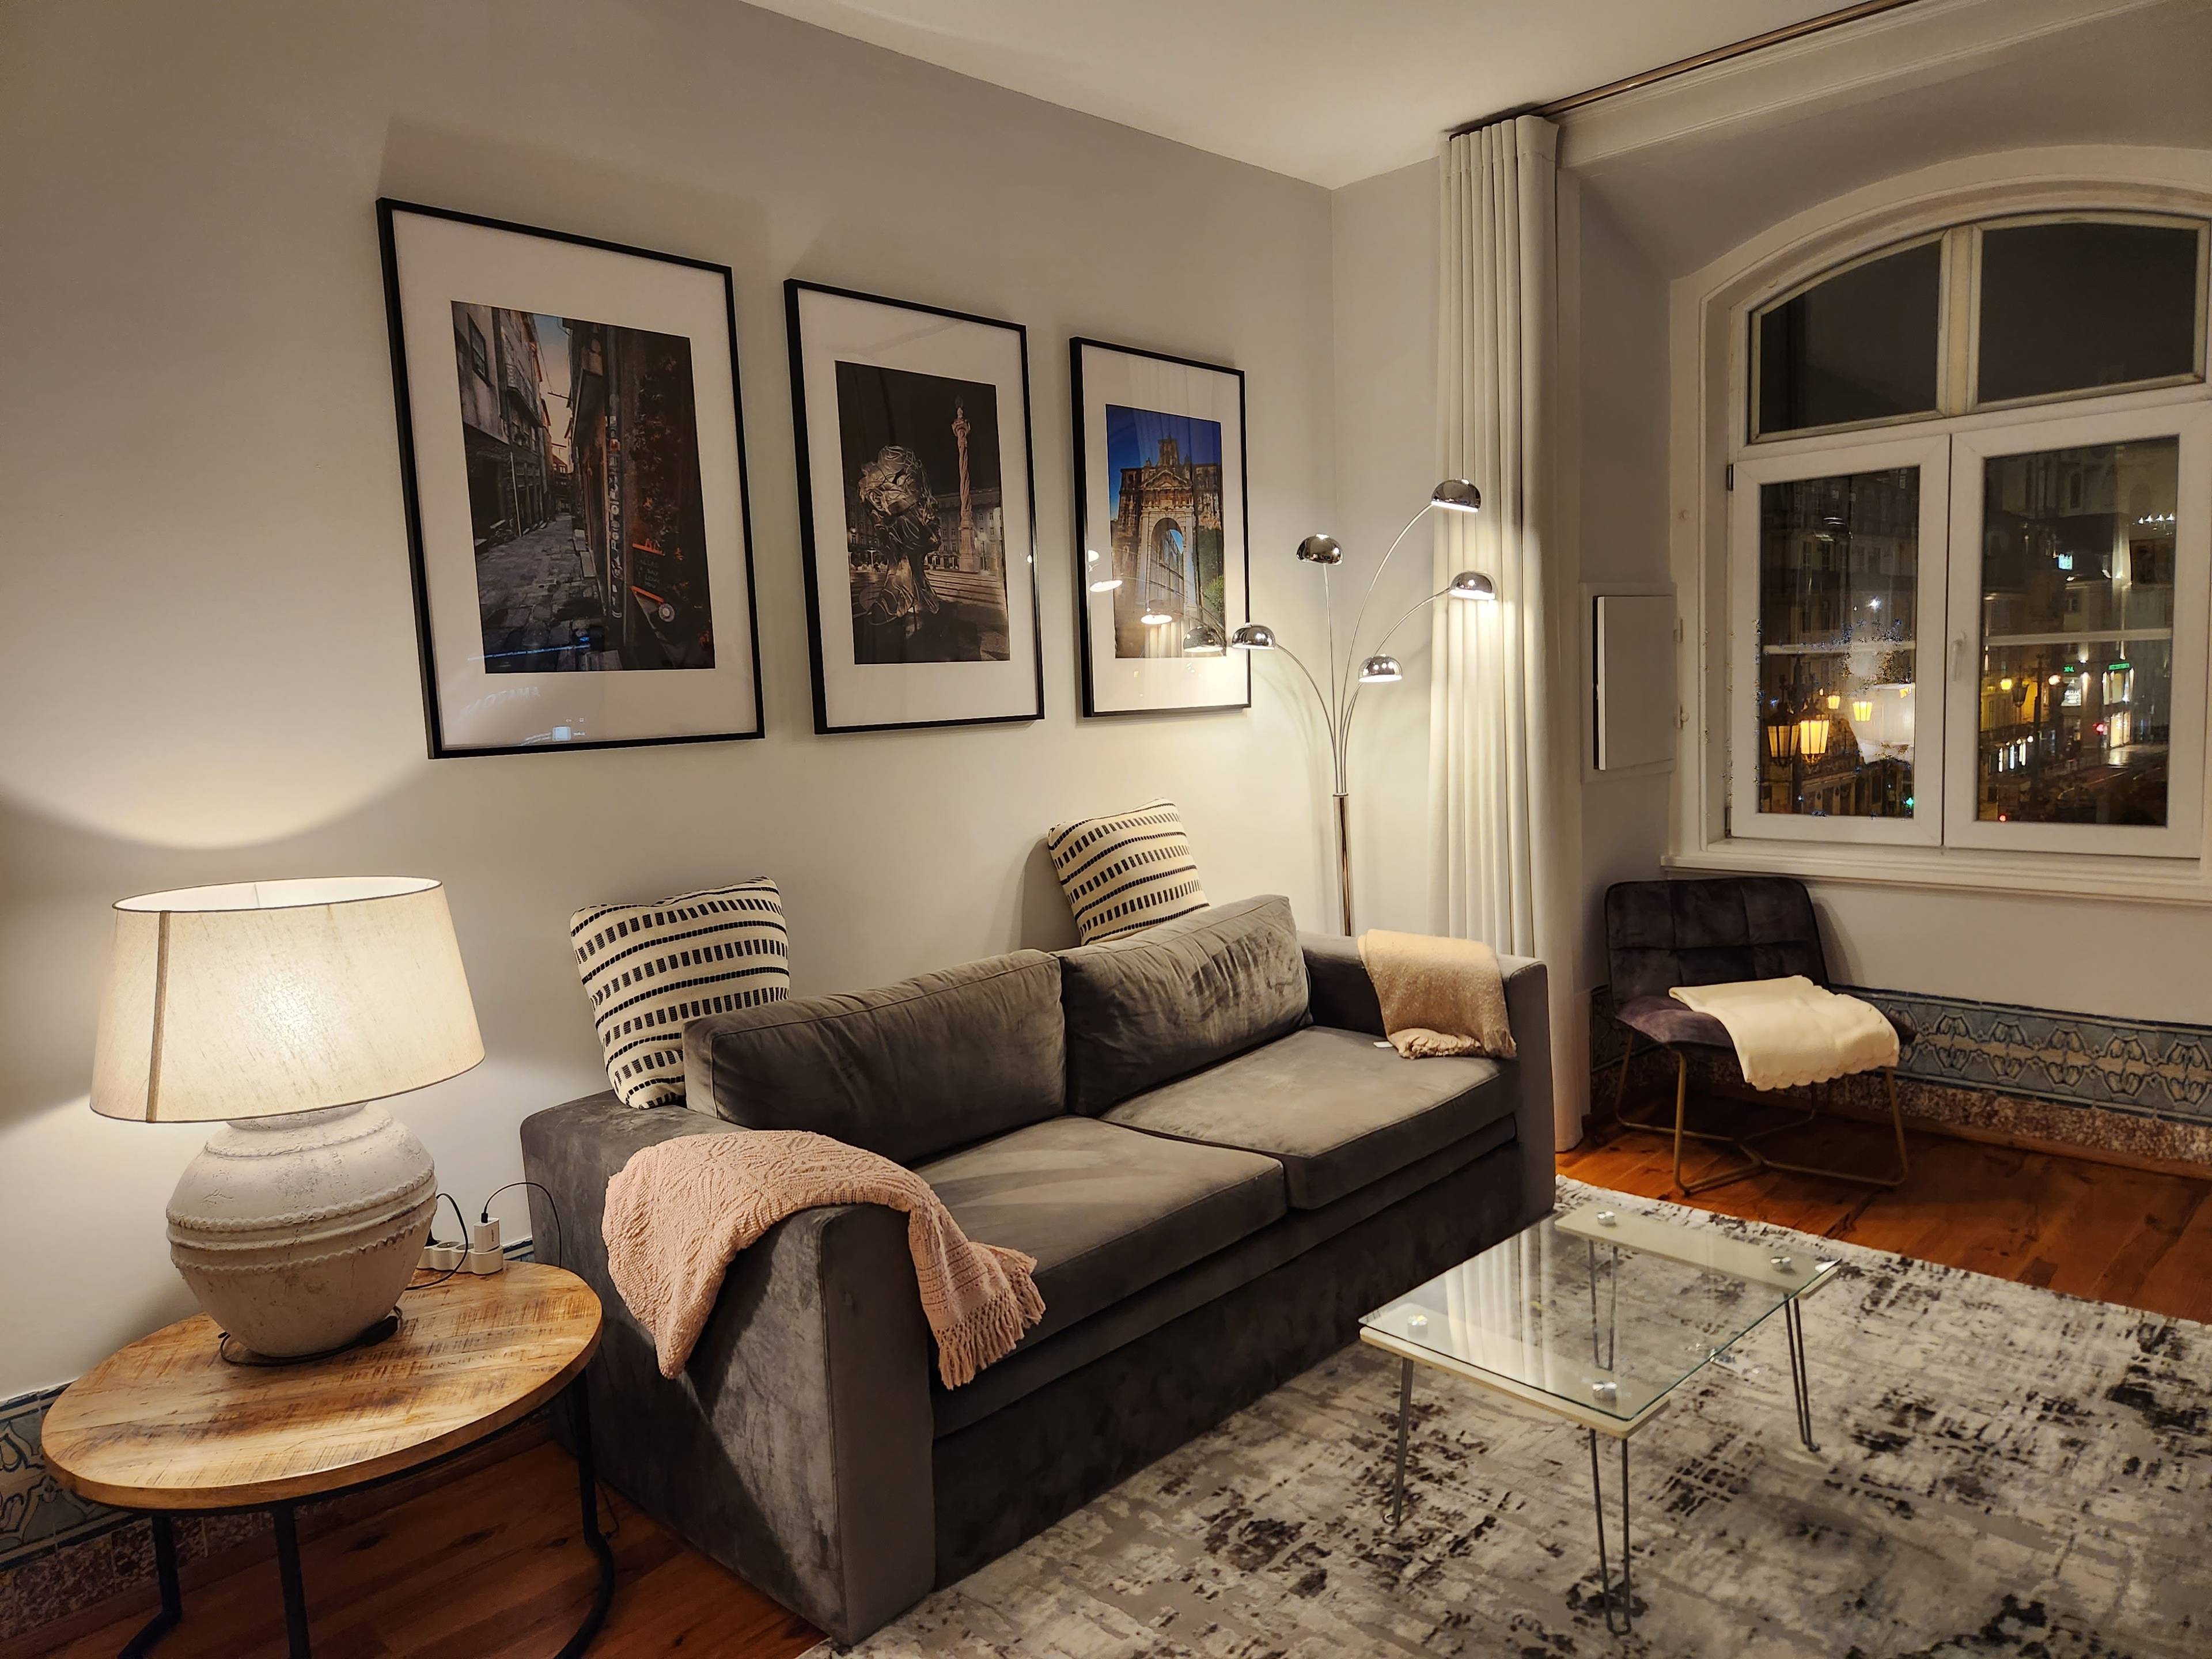 2 Bedroom Apartment for Rent in the Heart of Lisbon | Fully Furnished